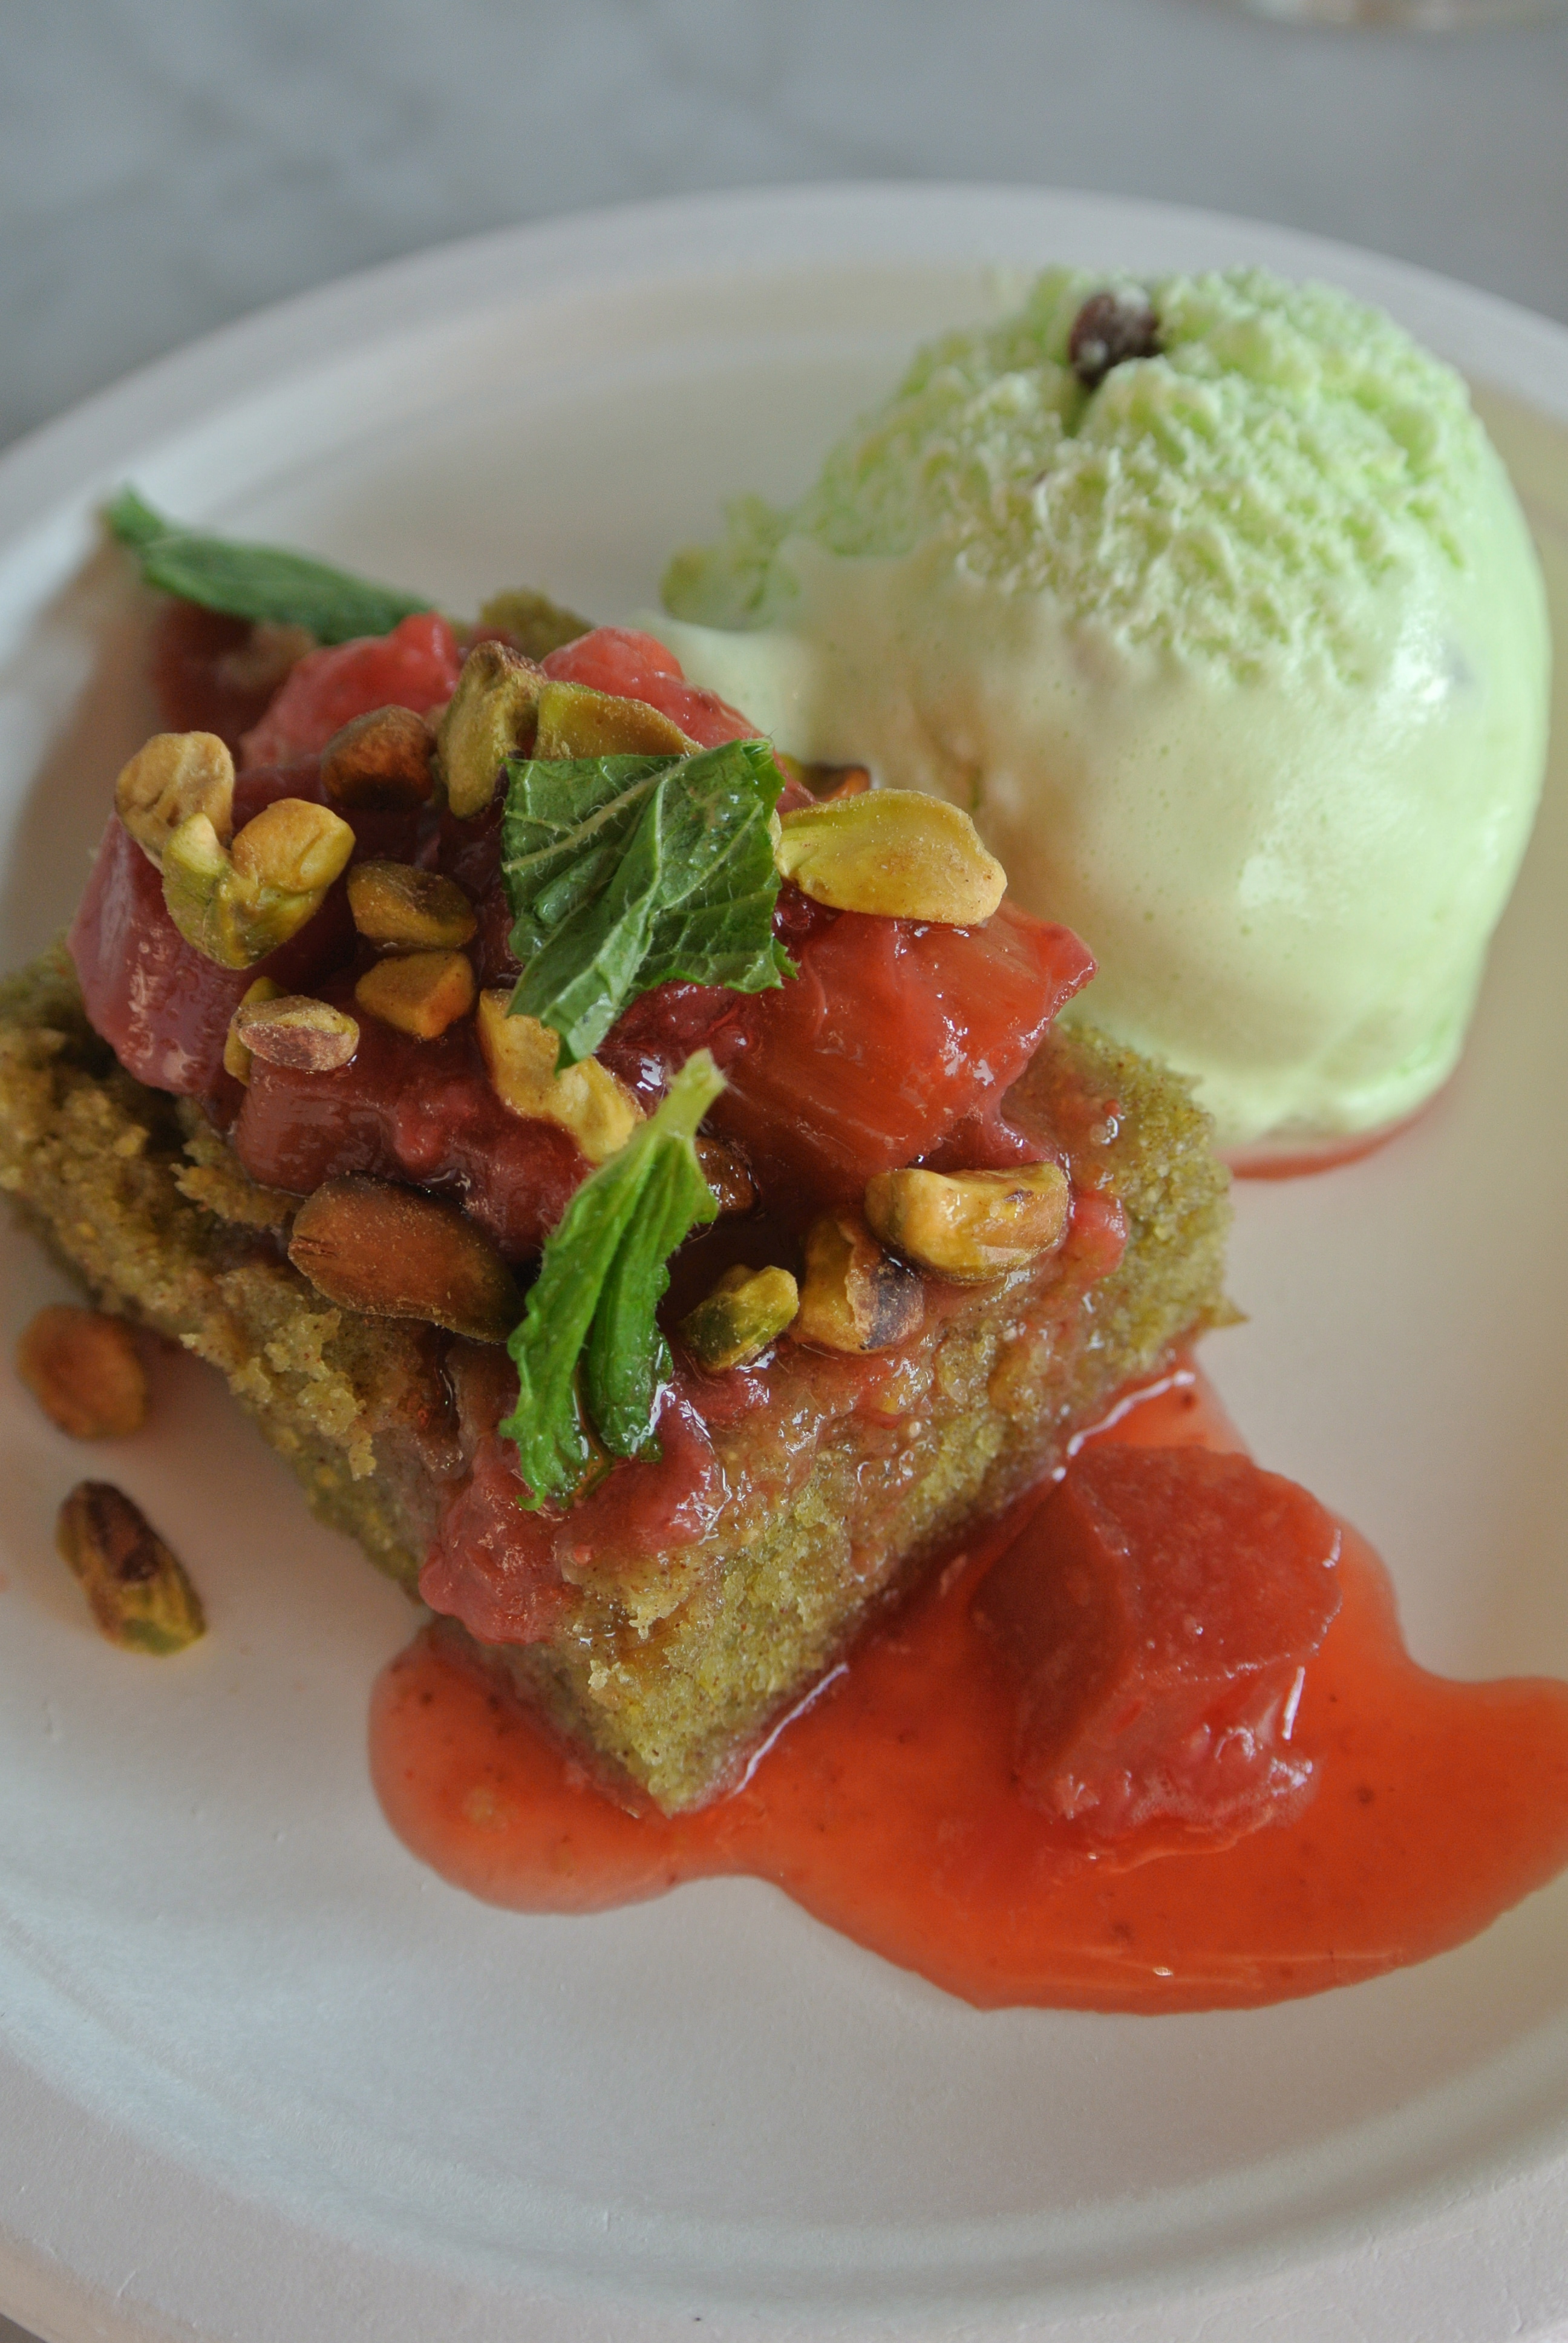 The Harbord Room's rhubarb, strawberry and pistachio upside-down cake, mint ice cream and preserved strawberries.